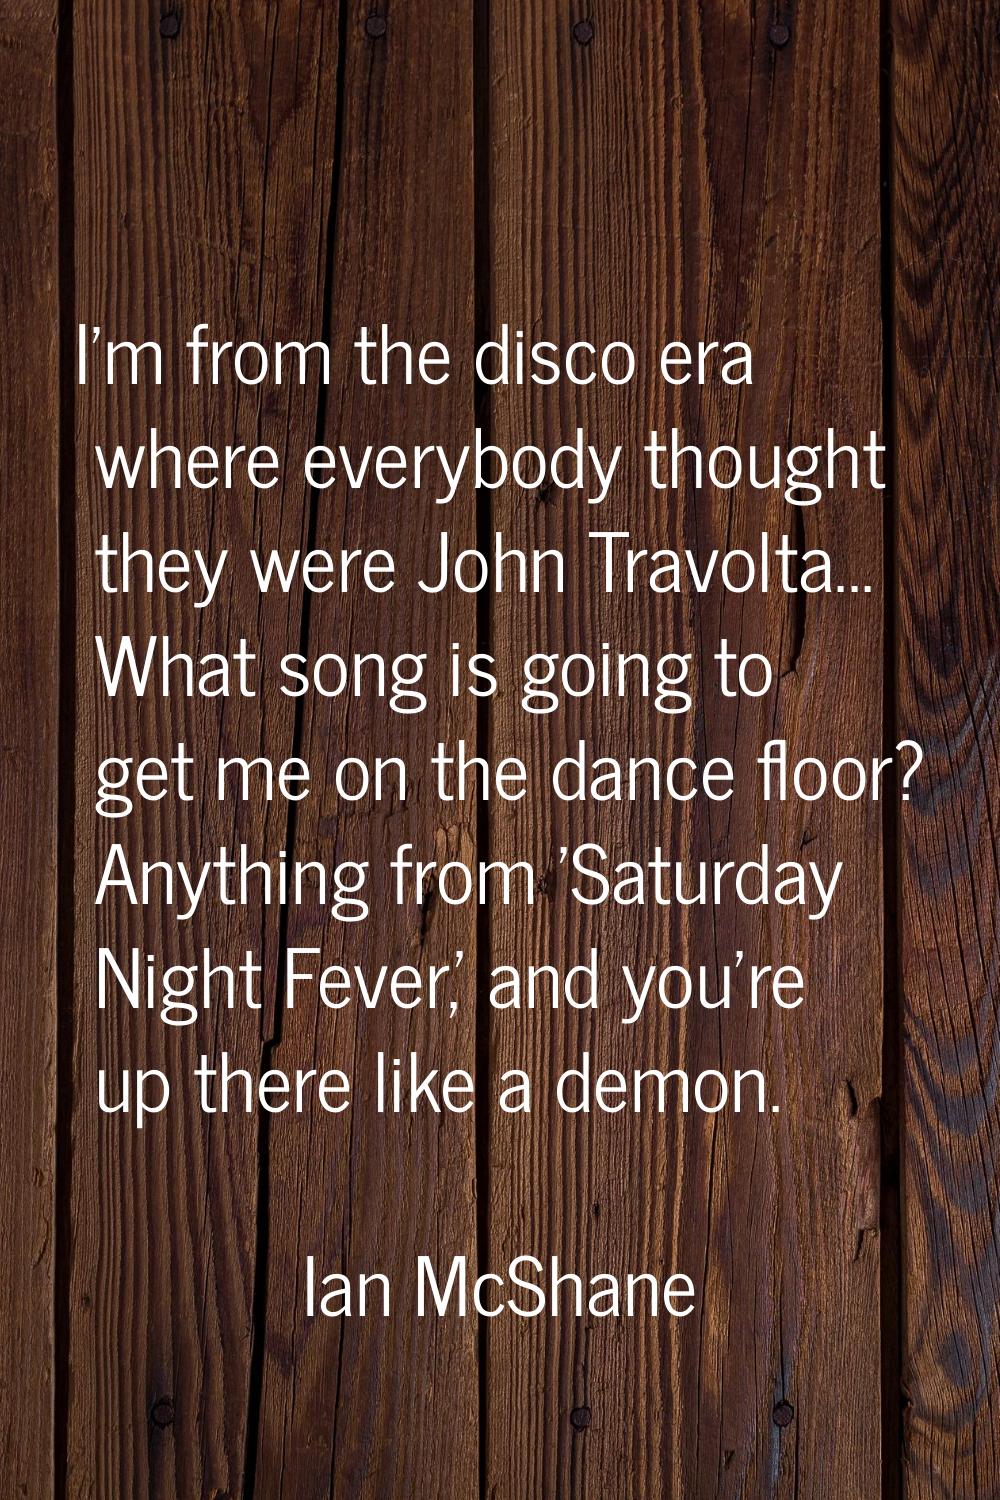 I'm from the disco era where everybody thought they were John Travolta... What song is going to get